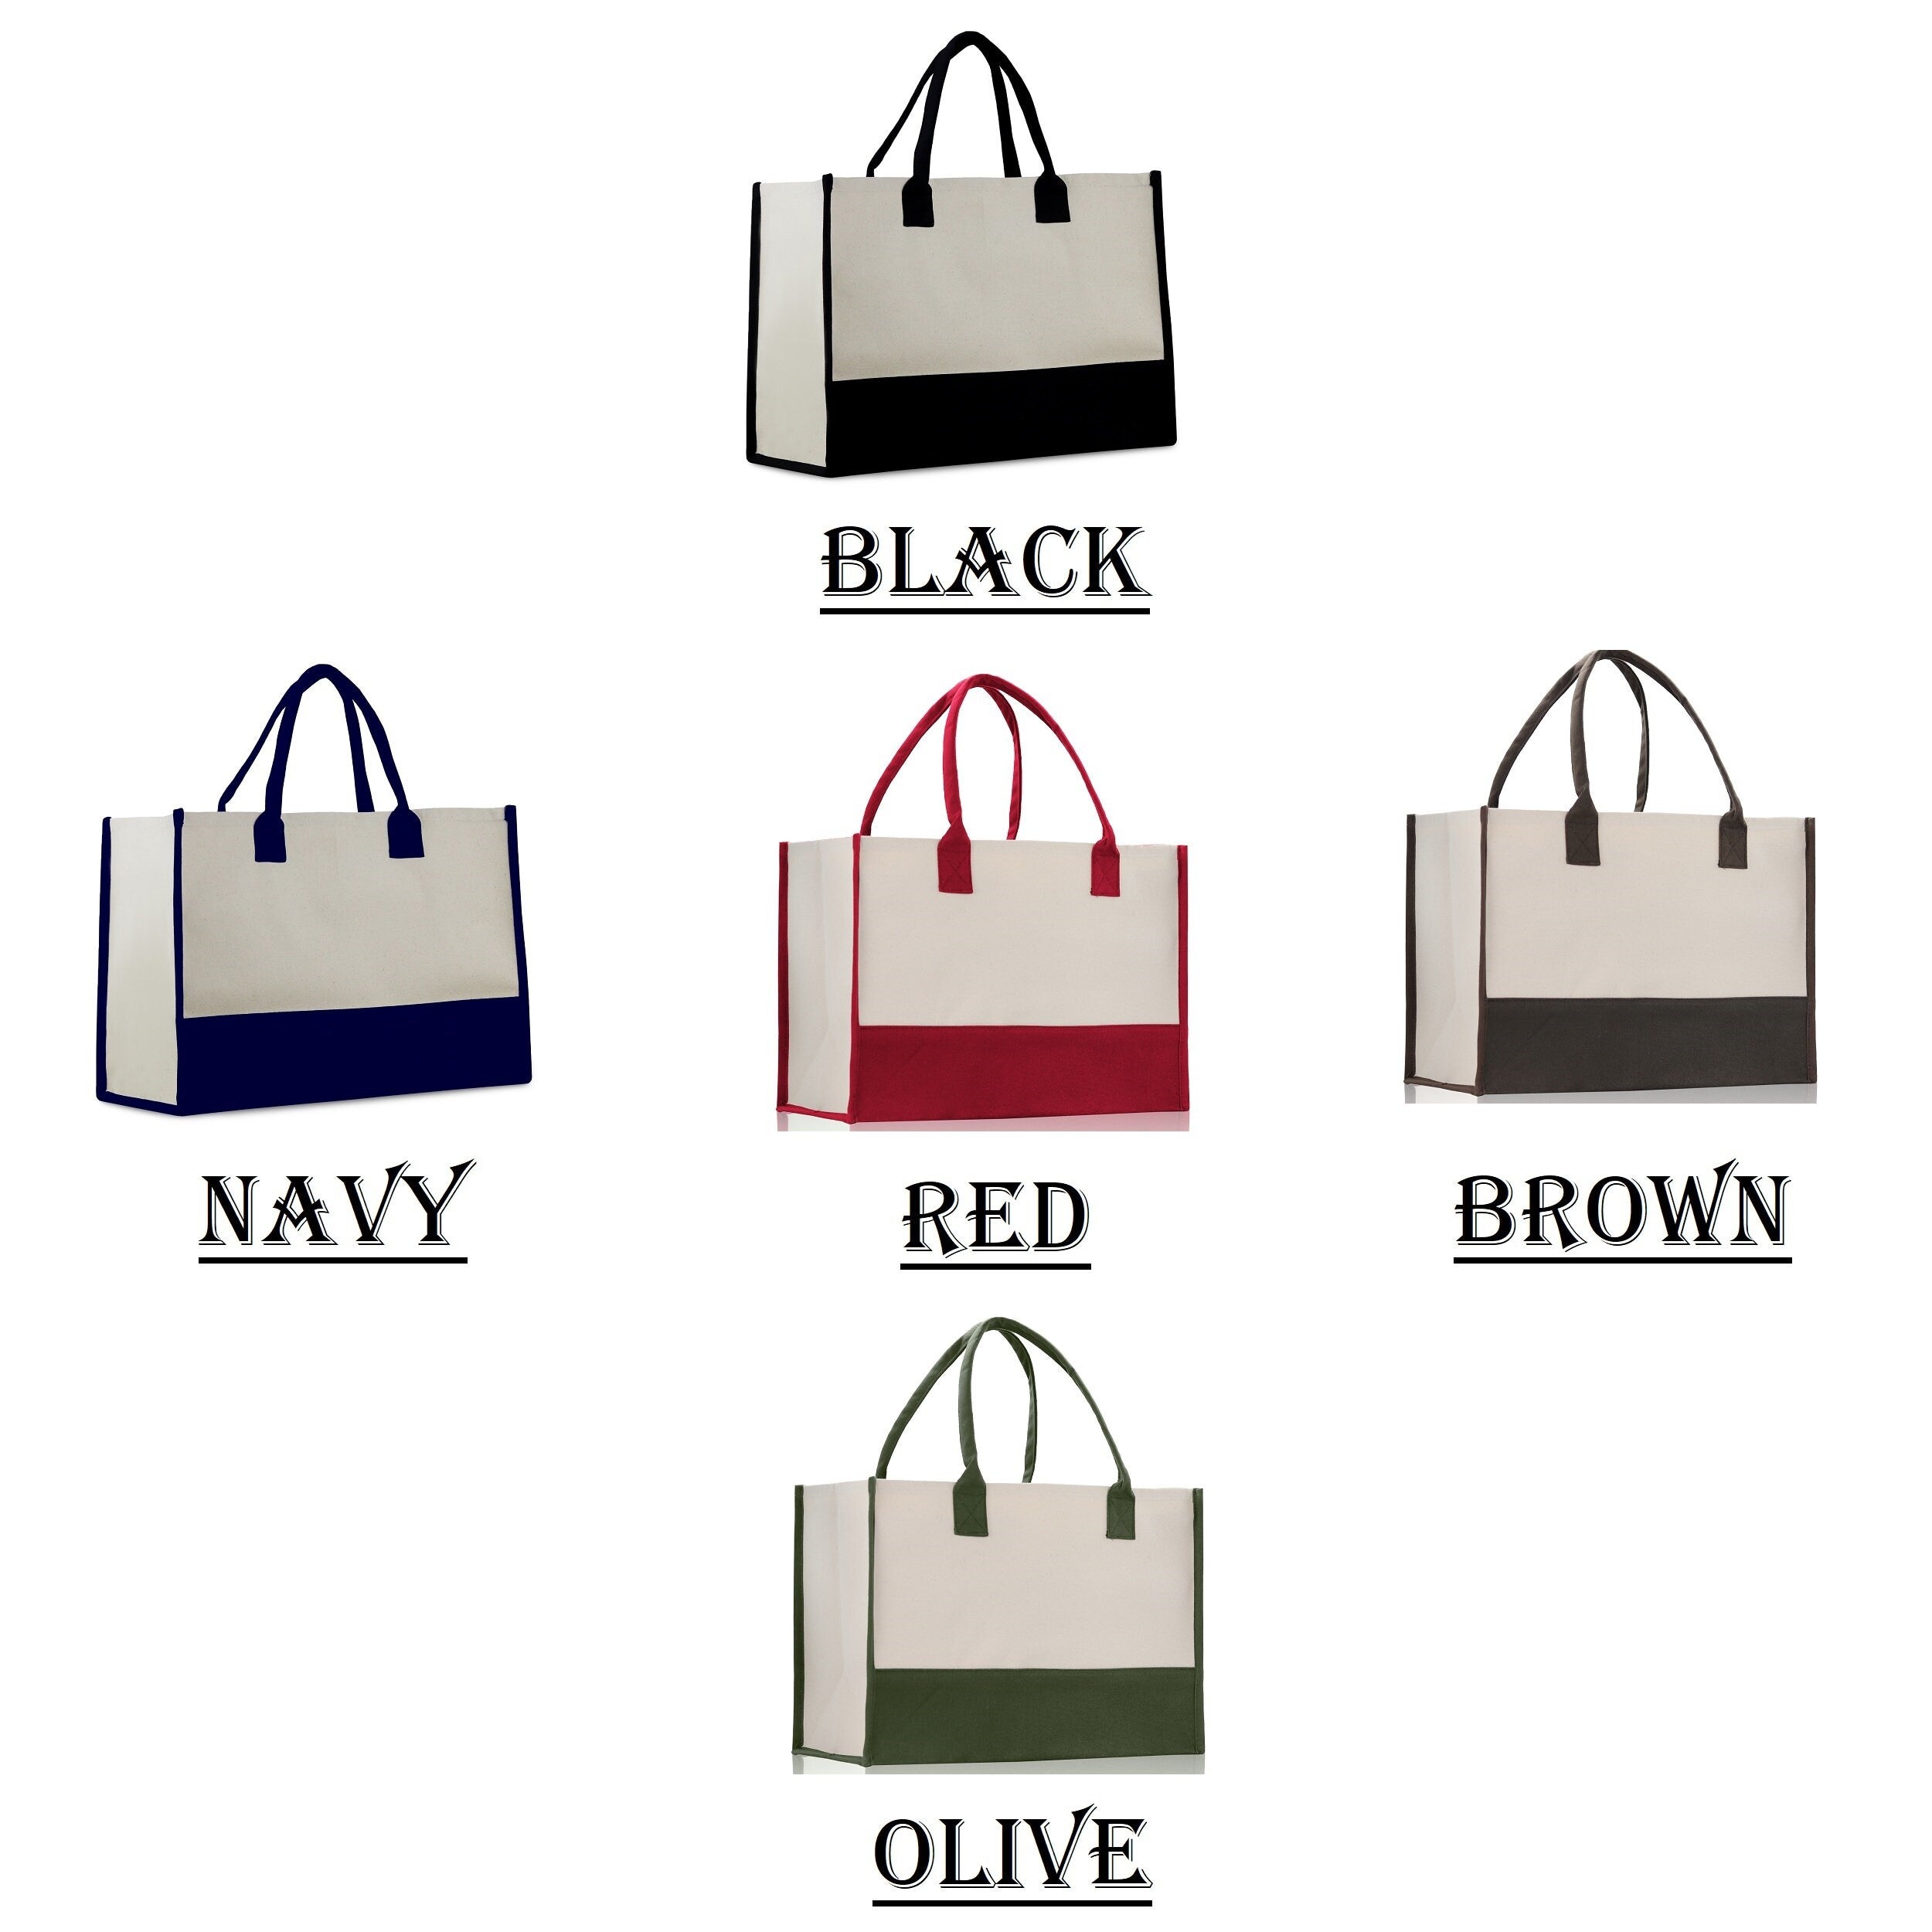 Customized Embroidered Name Tote Bag 100% Cotton Canvas and a Chic Personalized Tote Bag, Beach Bag, Market Bag, Bridesmaid Bag - Olive